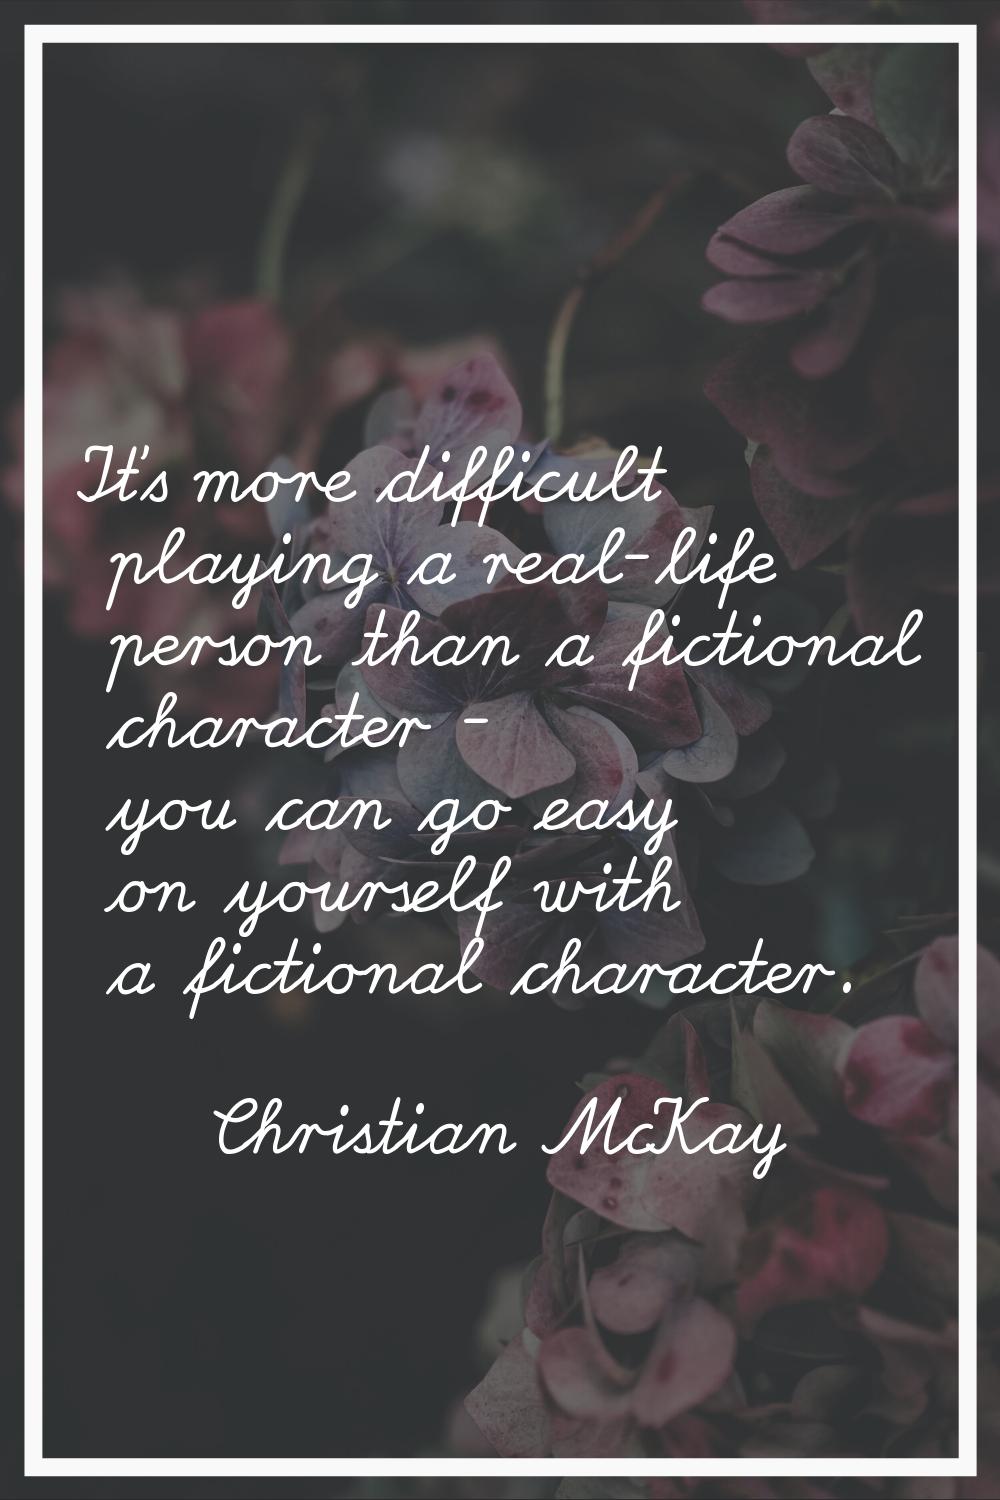 It's more difficult playing a real-life person than a fictional character - you can go easy on your